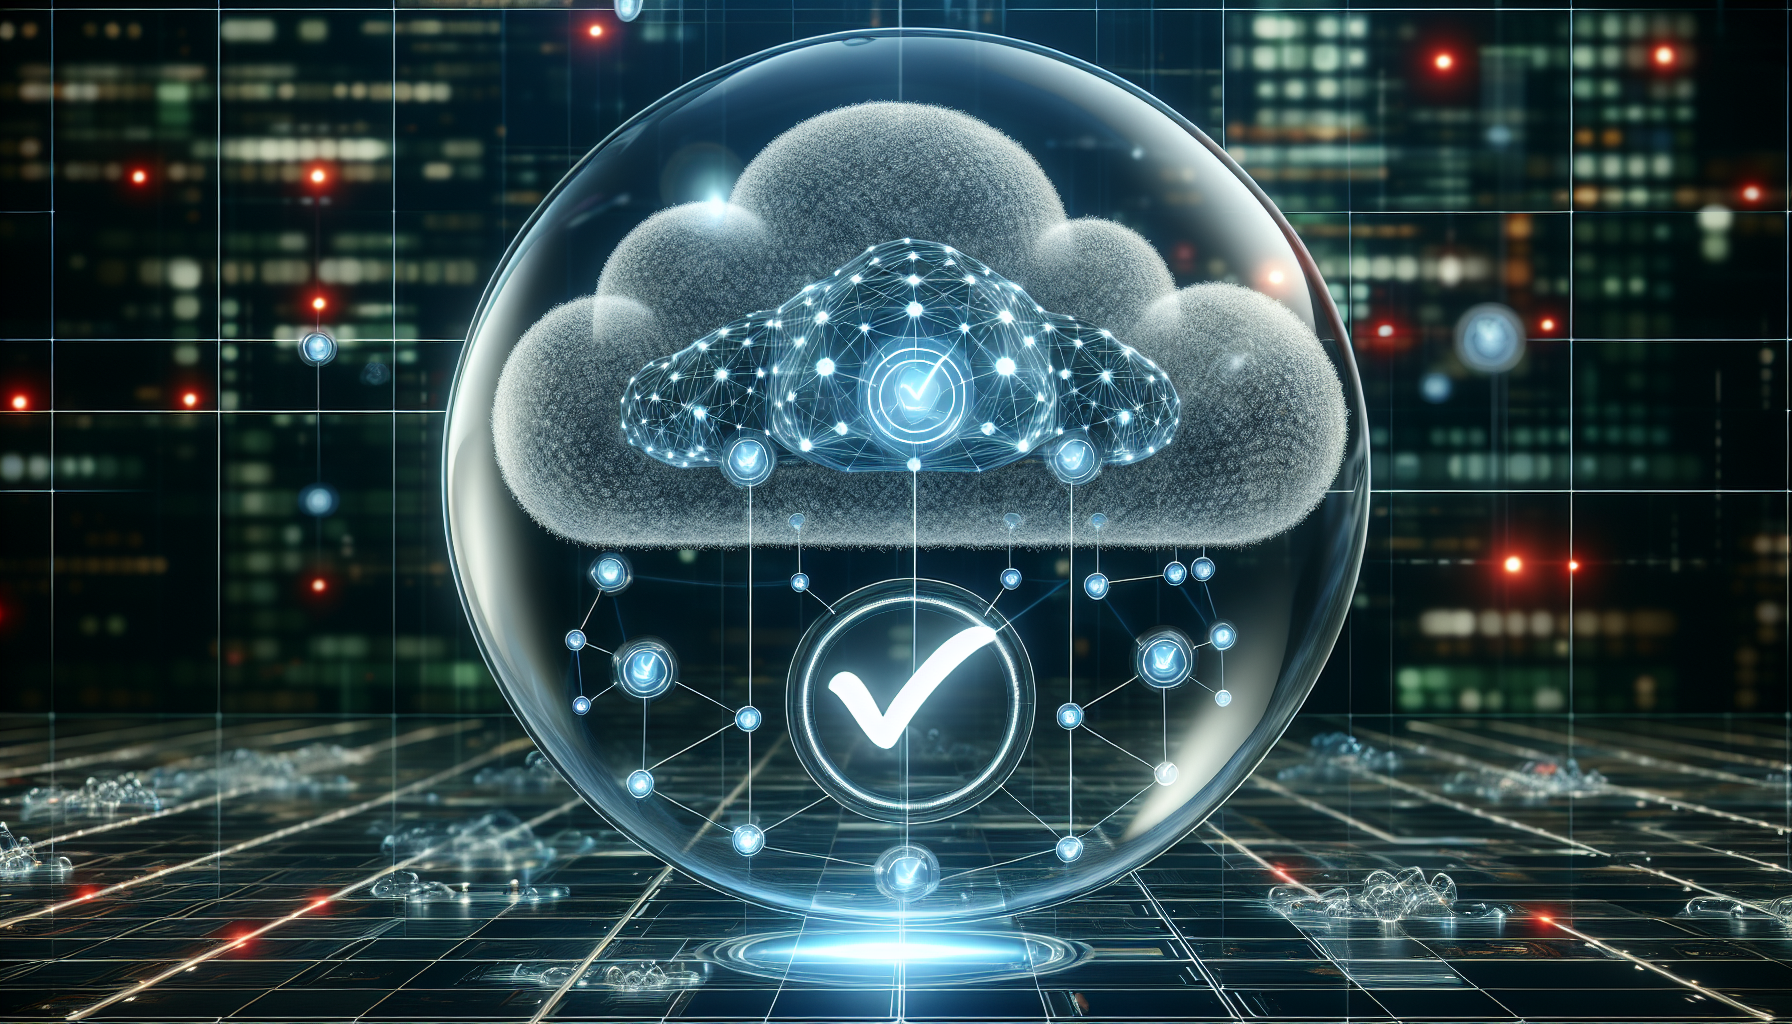 Illustration of secure cloud infrastructure in Oracle Analytics Cloud